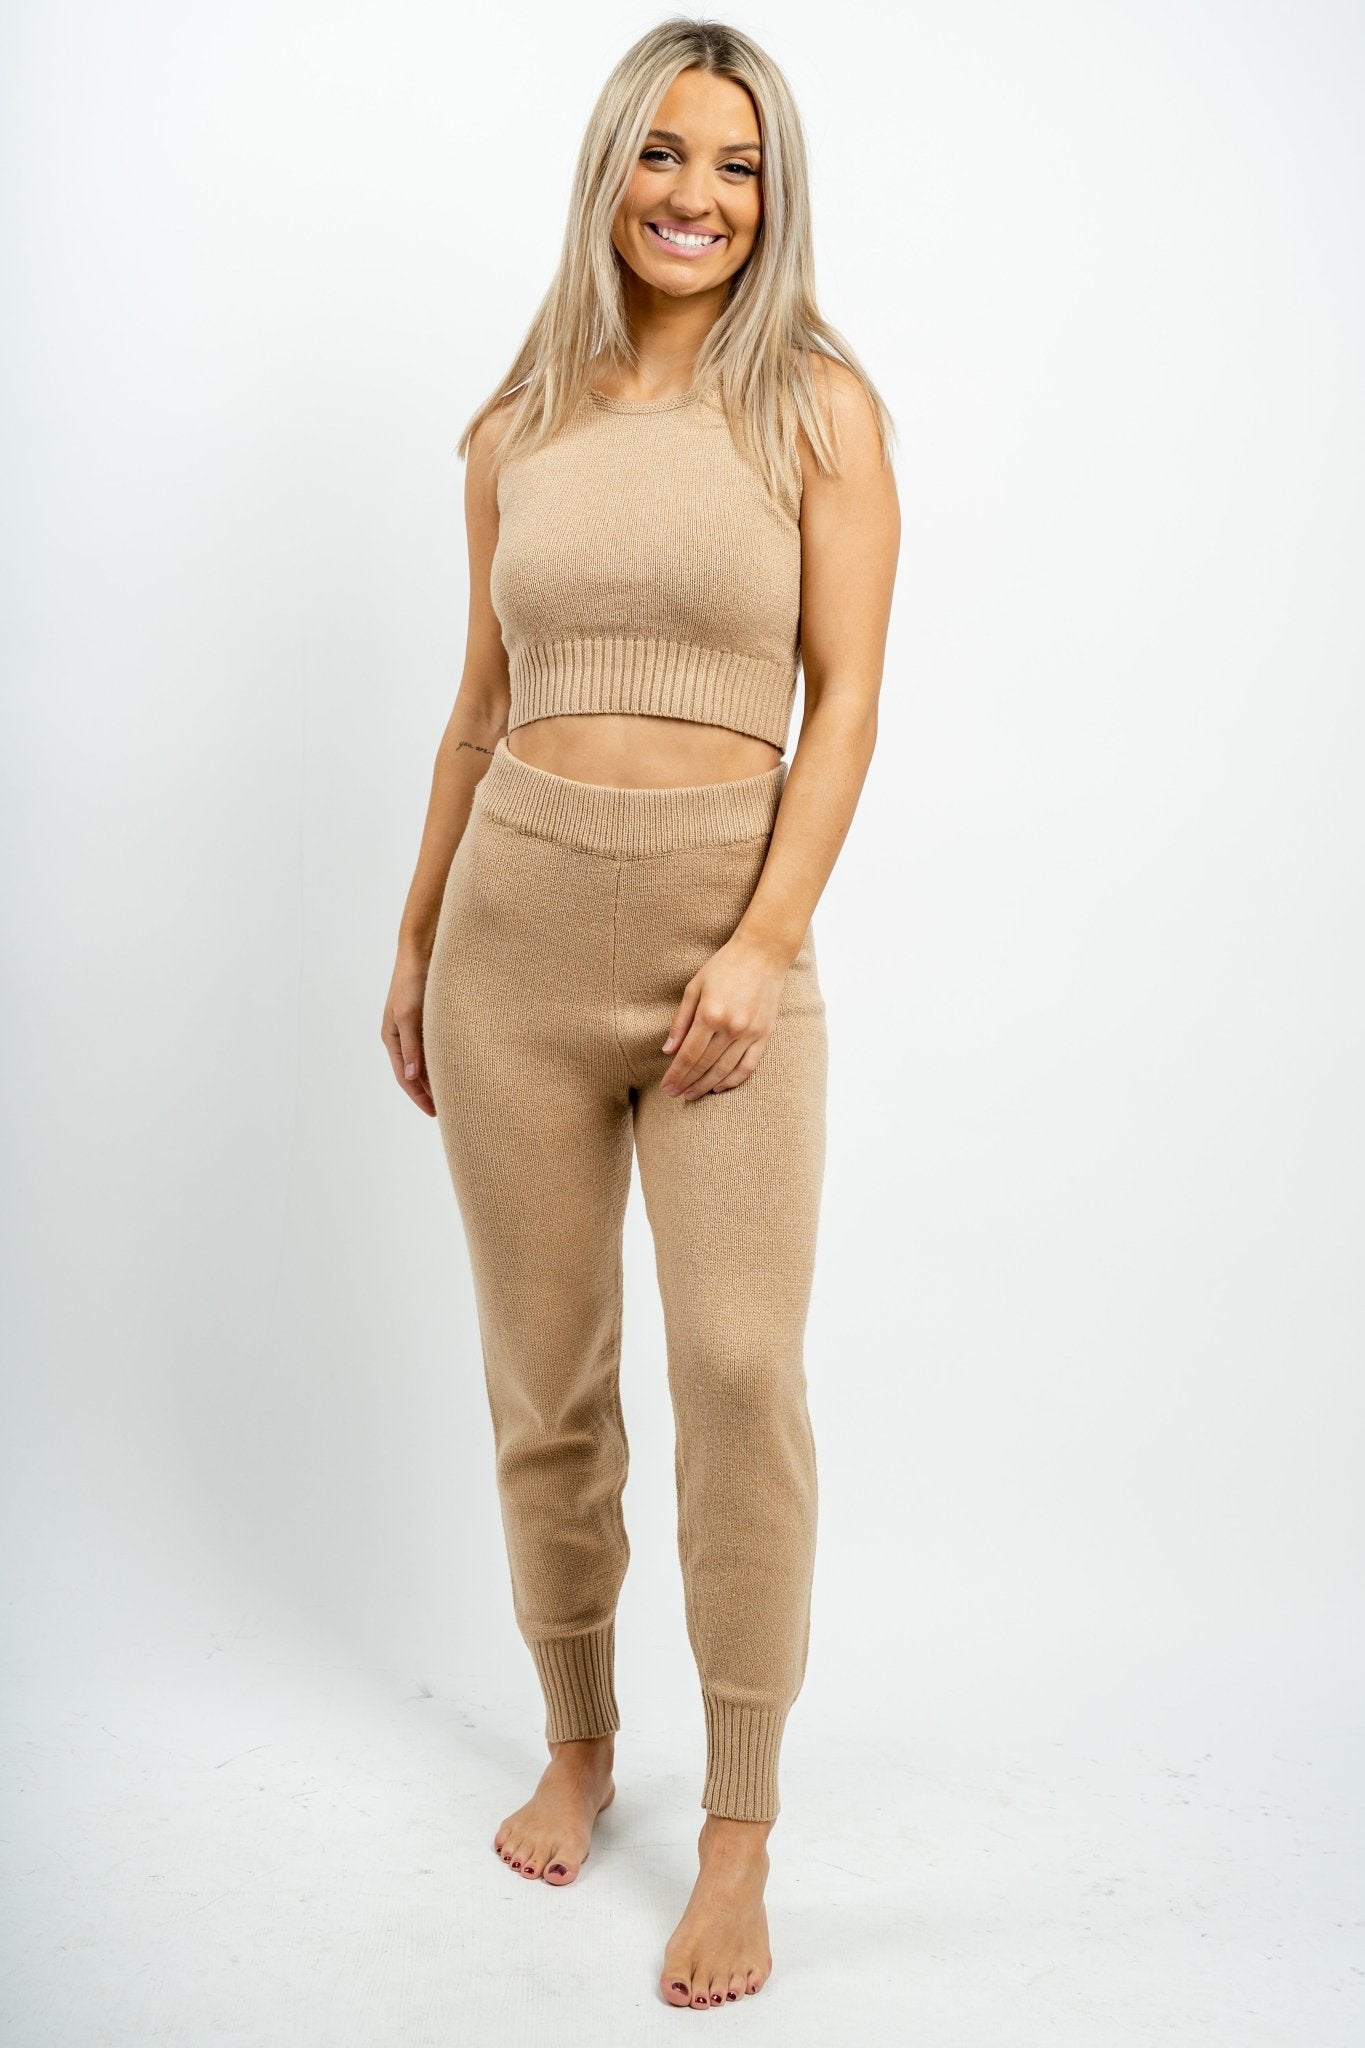 Knit jogger pant camel - Adorable Pants - Stylish Comfortable Outfits at Lush Fashion Lounge Boutique in OKC